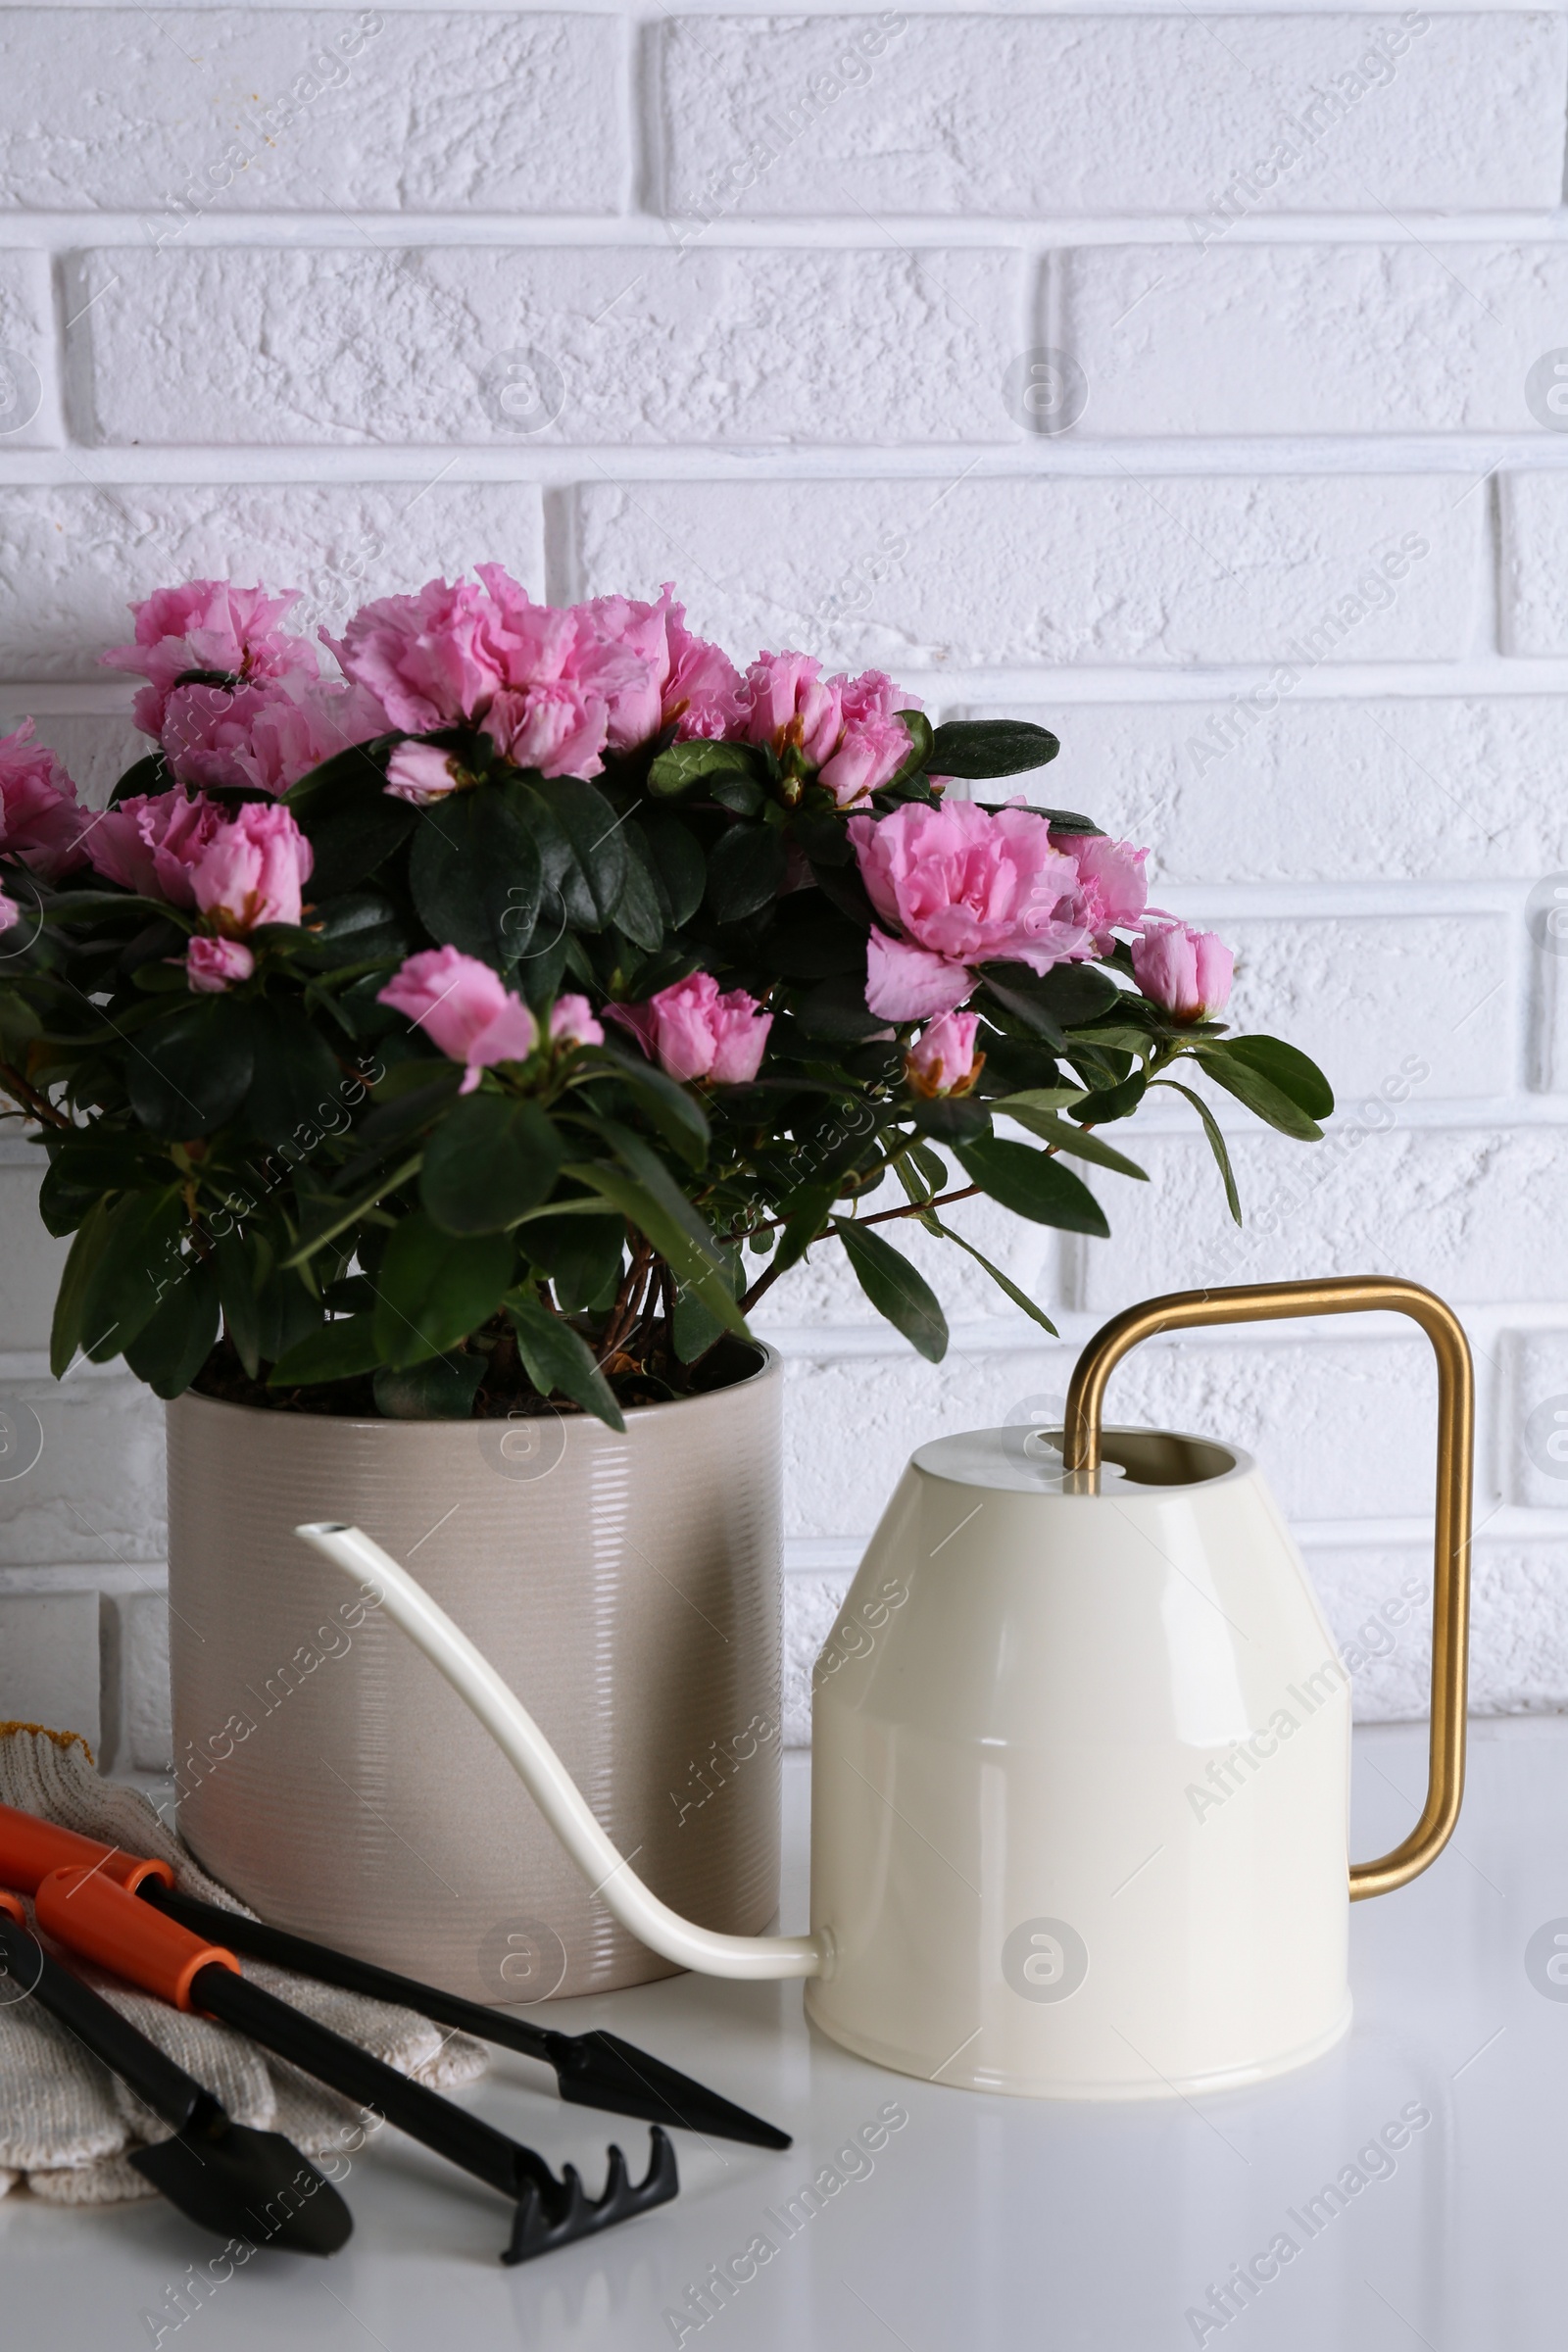 Photo of Beautiful Azalea flower in plant pot and gardening tools on table against brick wall. House decor